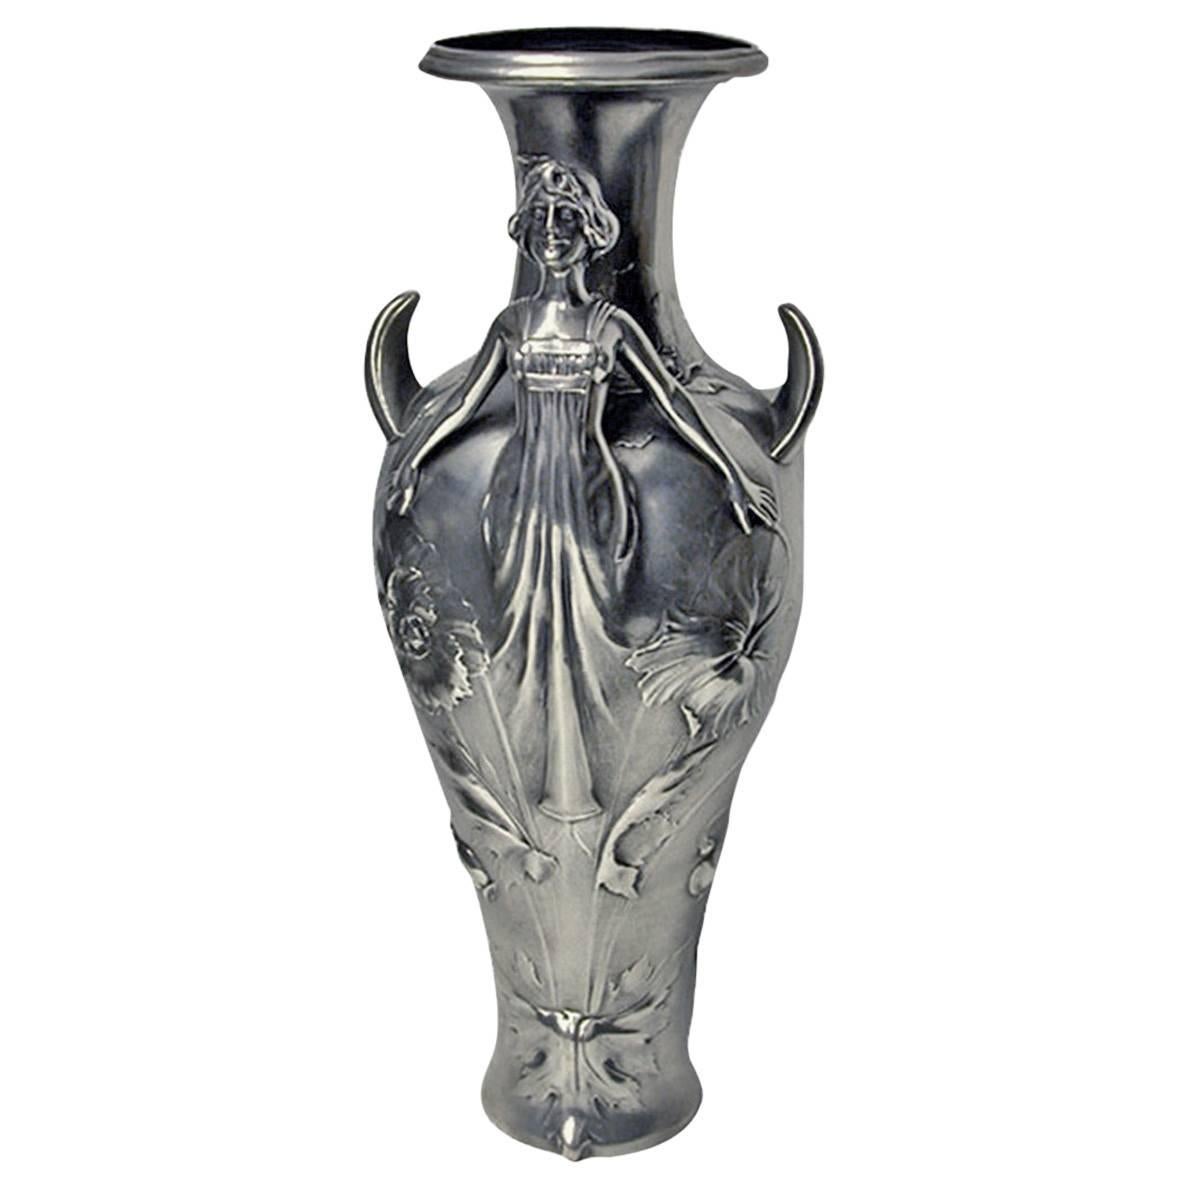 Art Nouveau Pewter Tall Vase "Loie Fuller" Style, France, circa 1900